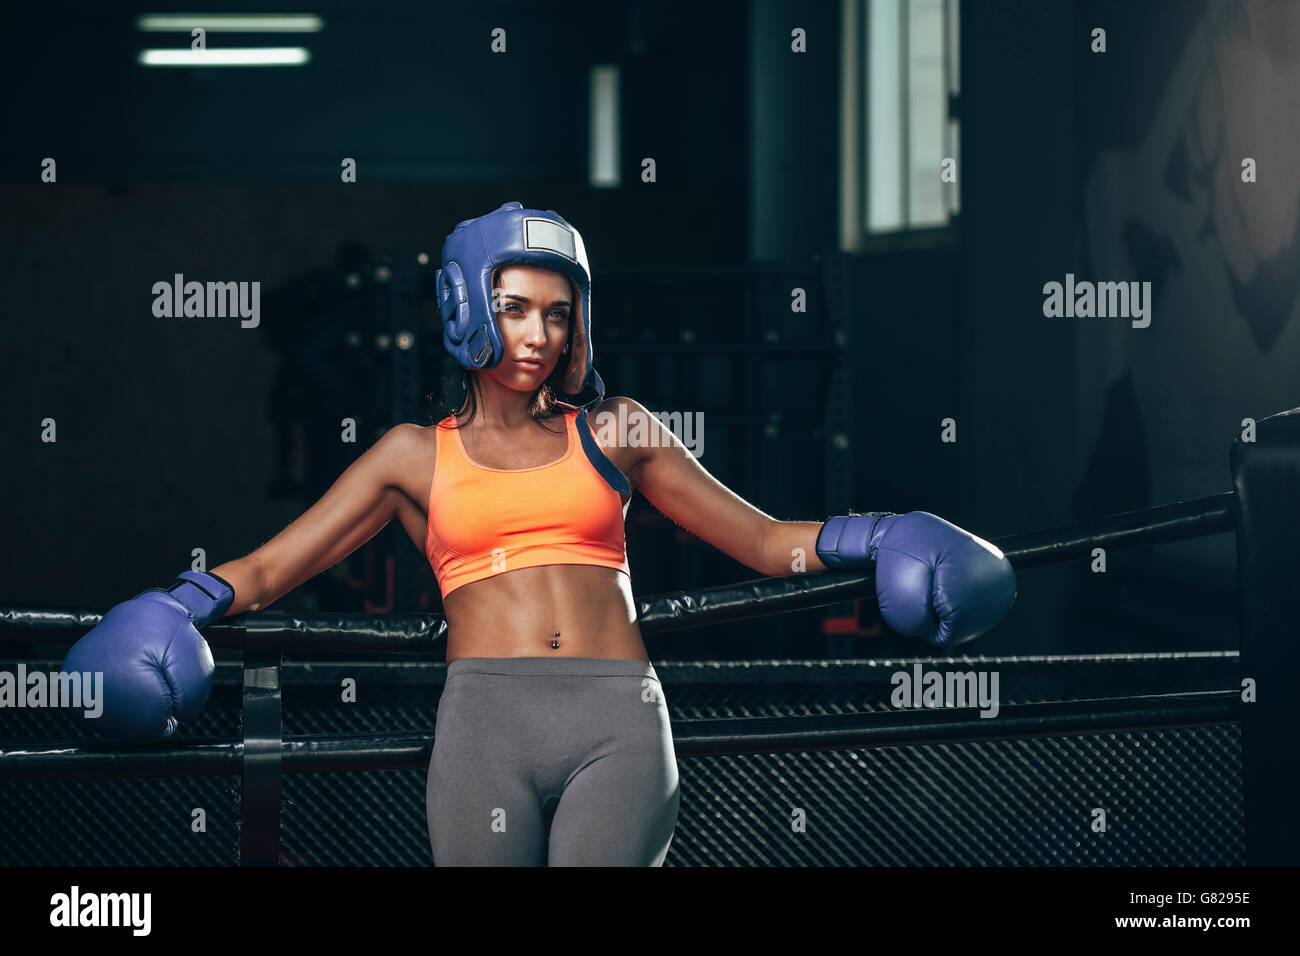 Female boxer leaning on ropes in boxing ring Stock Photo